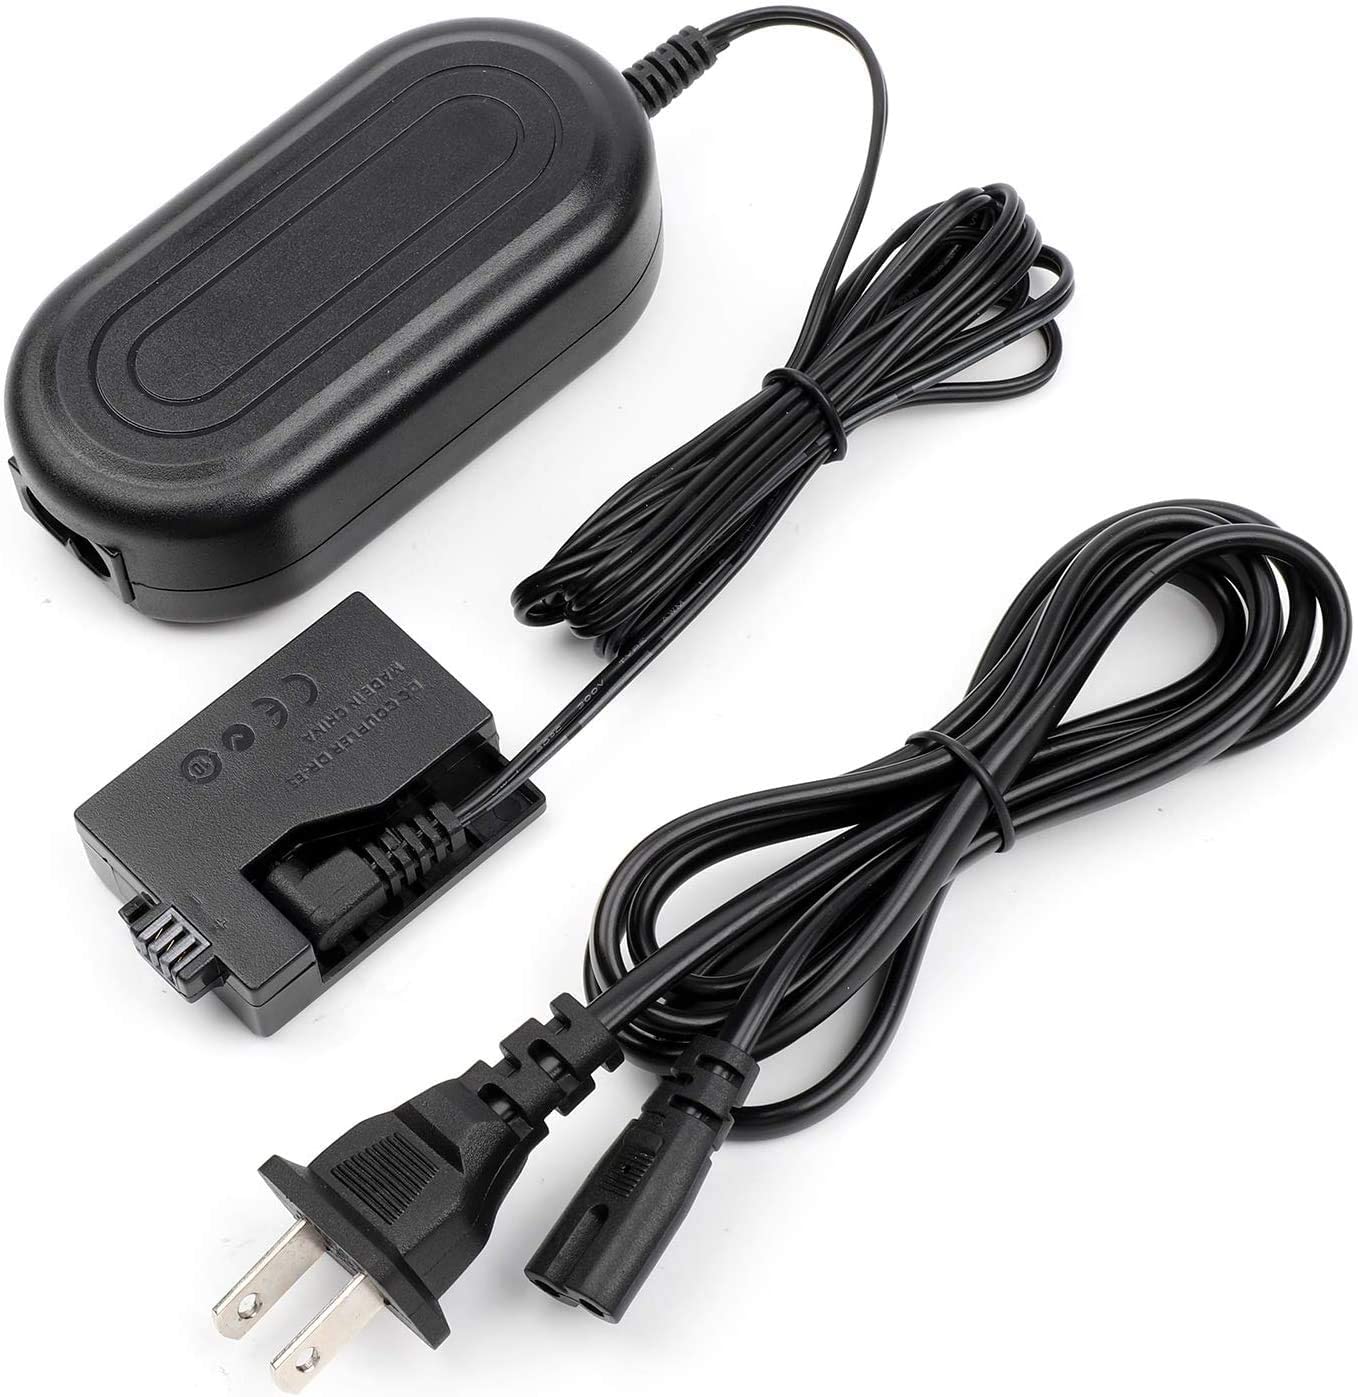 AC Power Adapter DR-E5 DC Coupler Charger Kit  - ENEGON